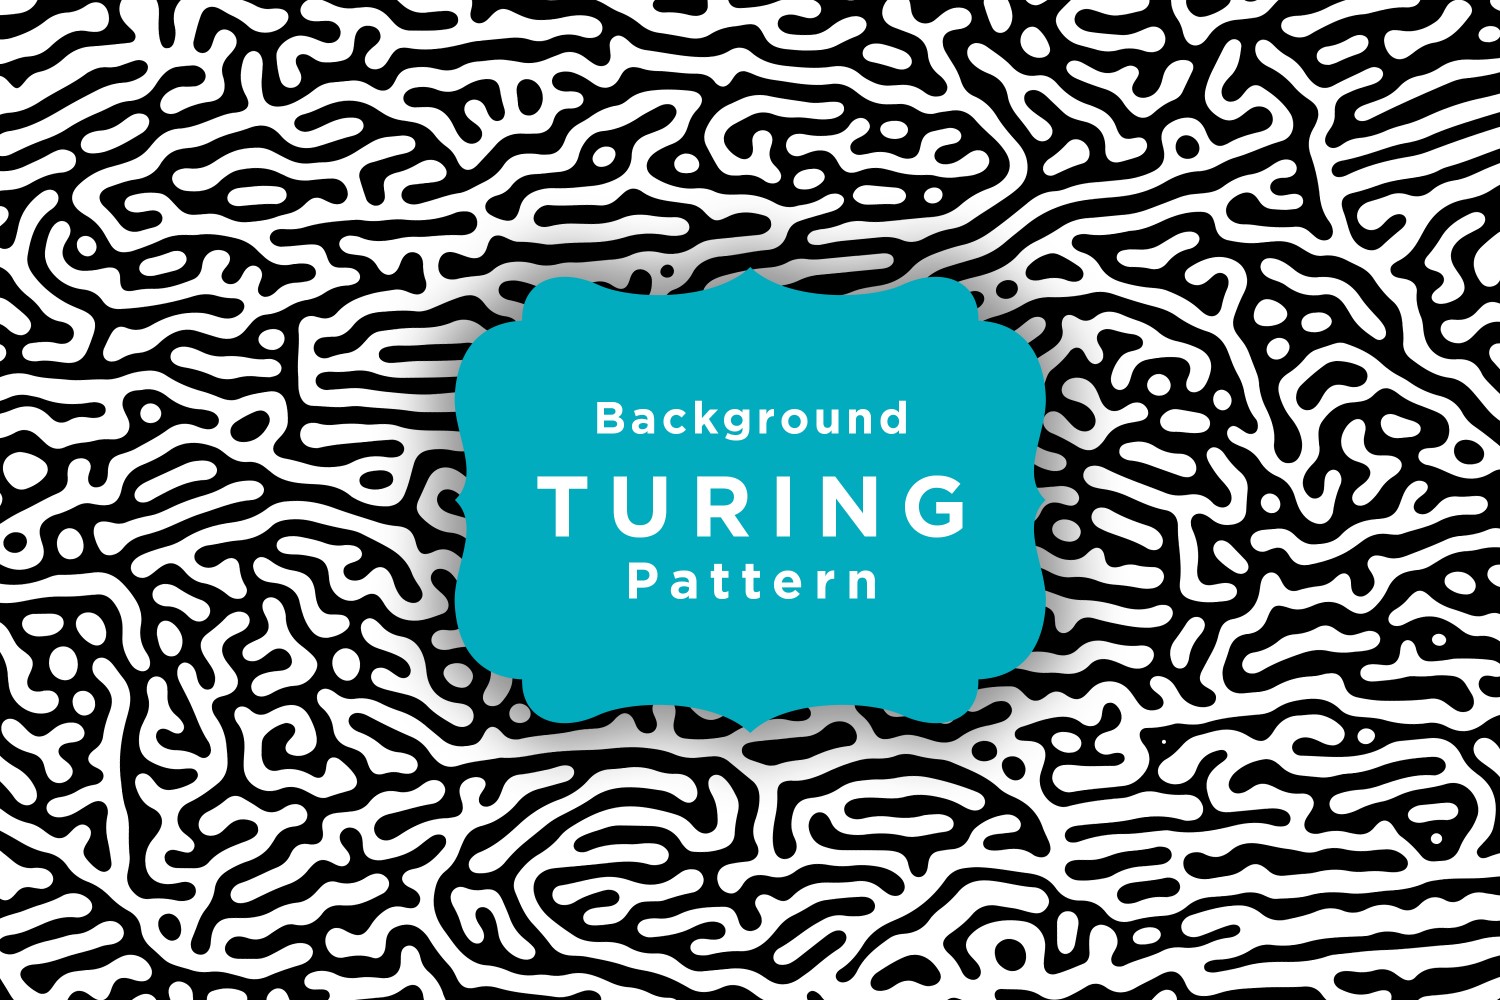 Turing Pattern Background Template